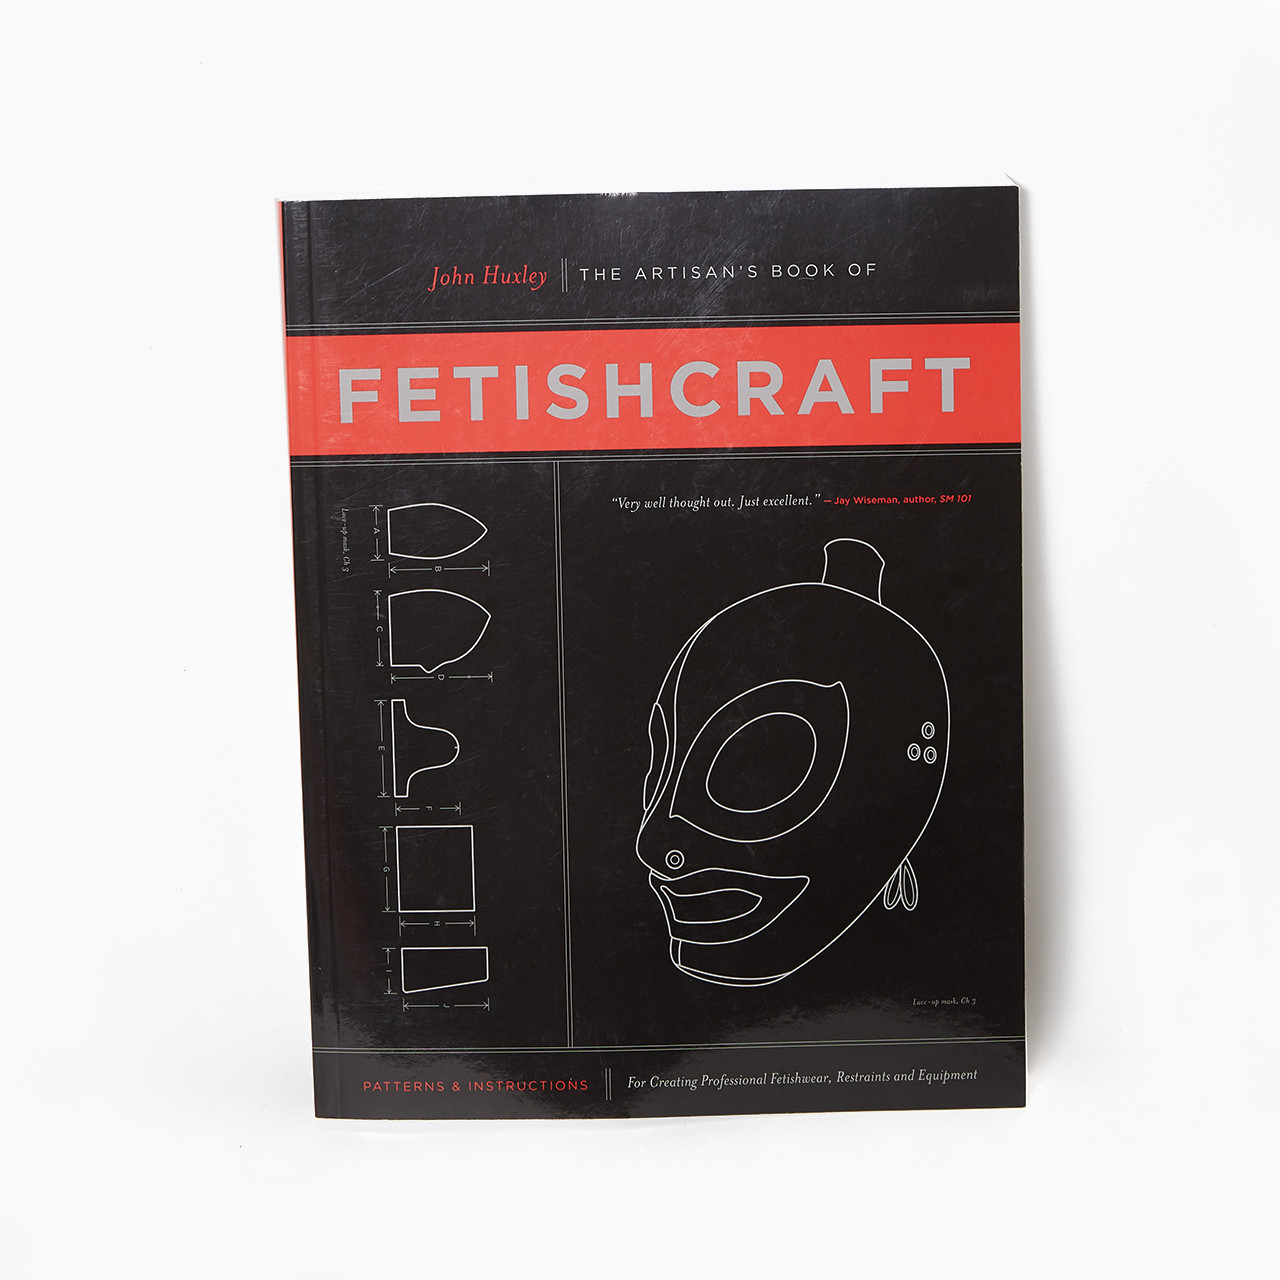 The Artisan's Book of Fetishcraft: Patterns and Instructions for Creating Professional Fetishwear, Restraints and Sensory Equipment by John Huxley